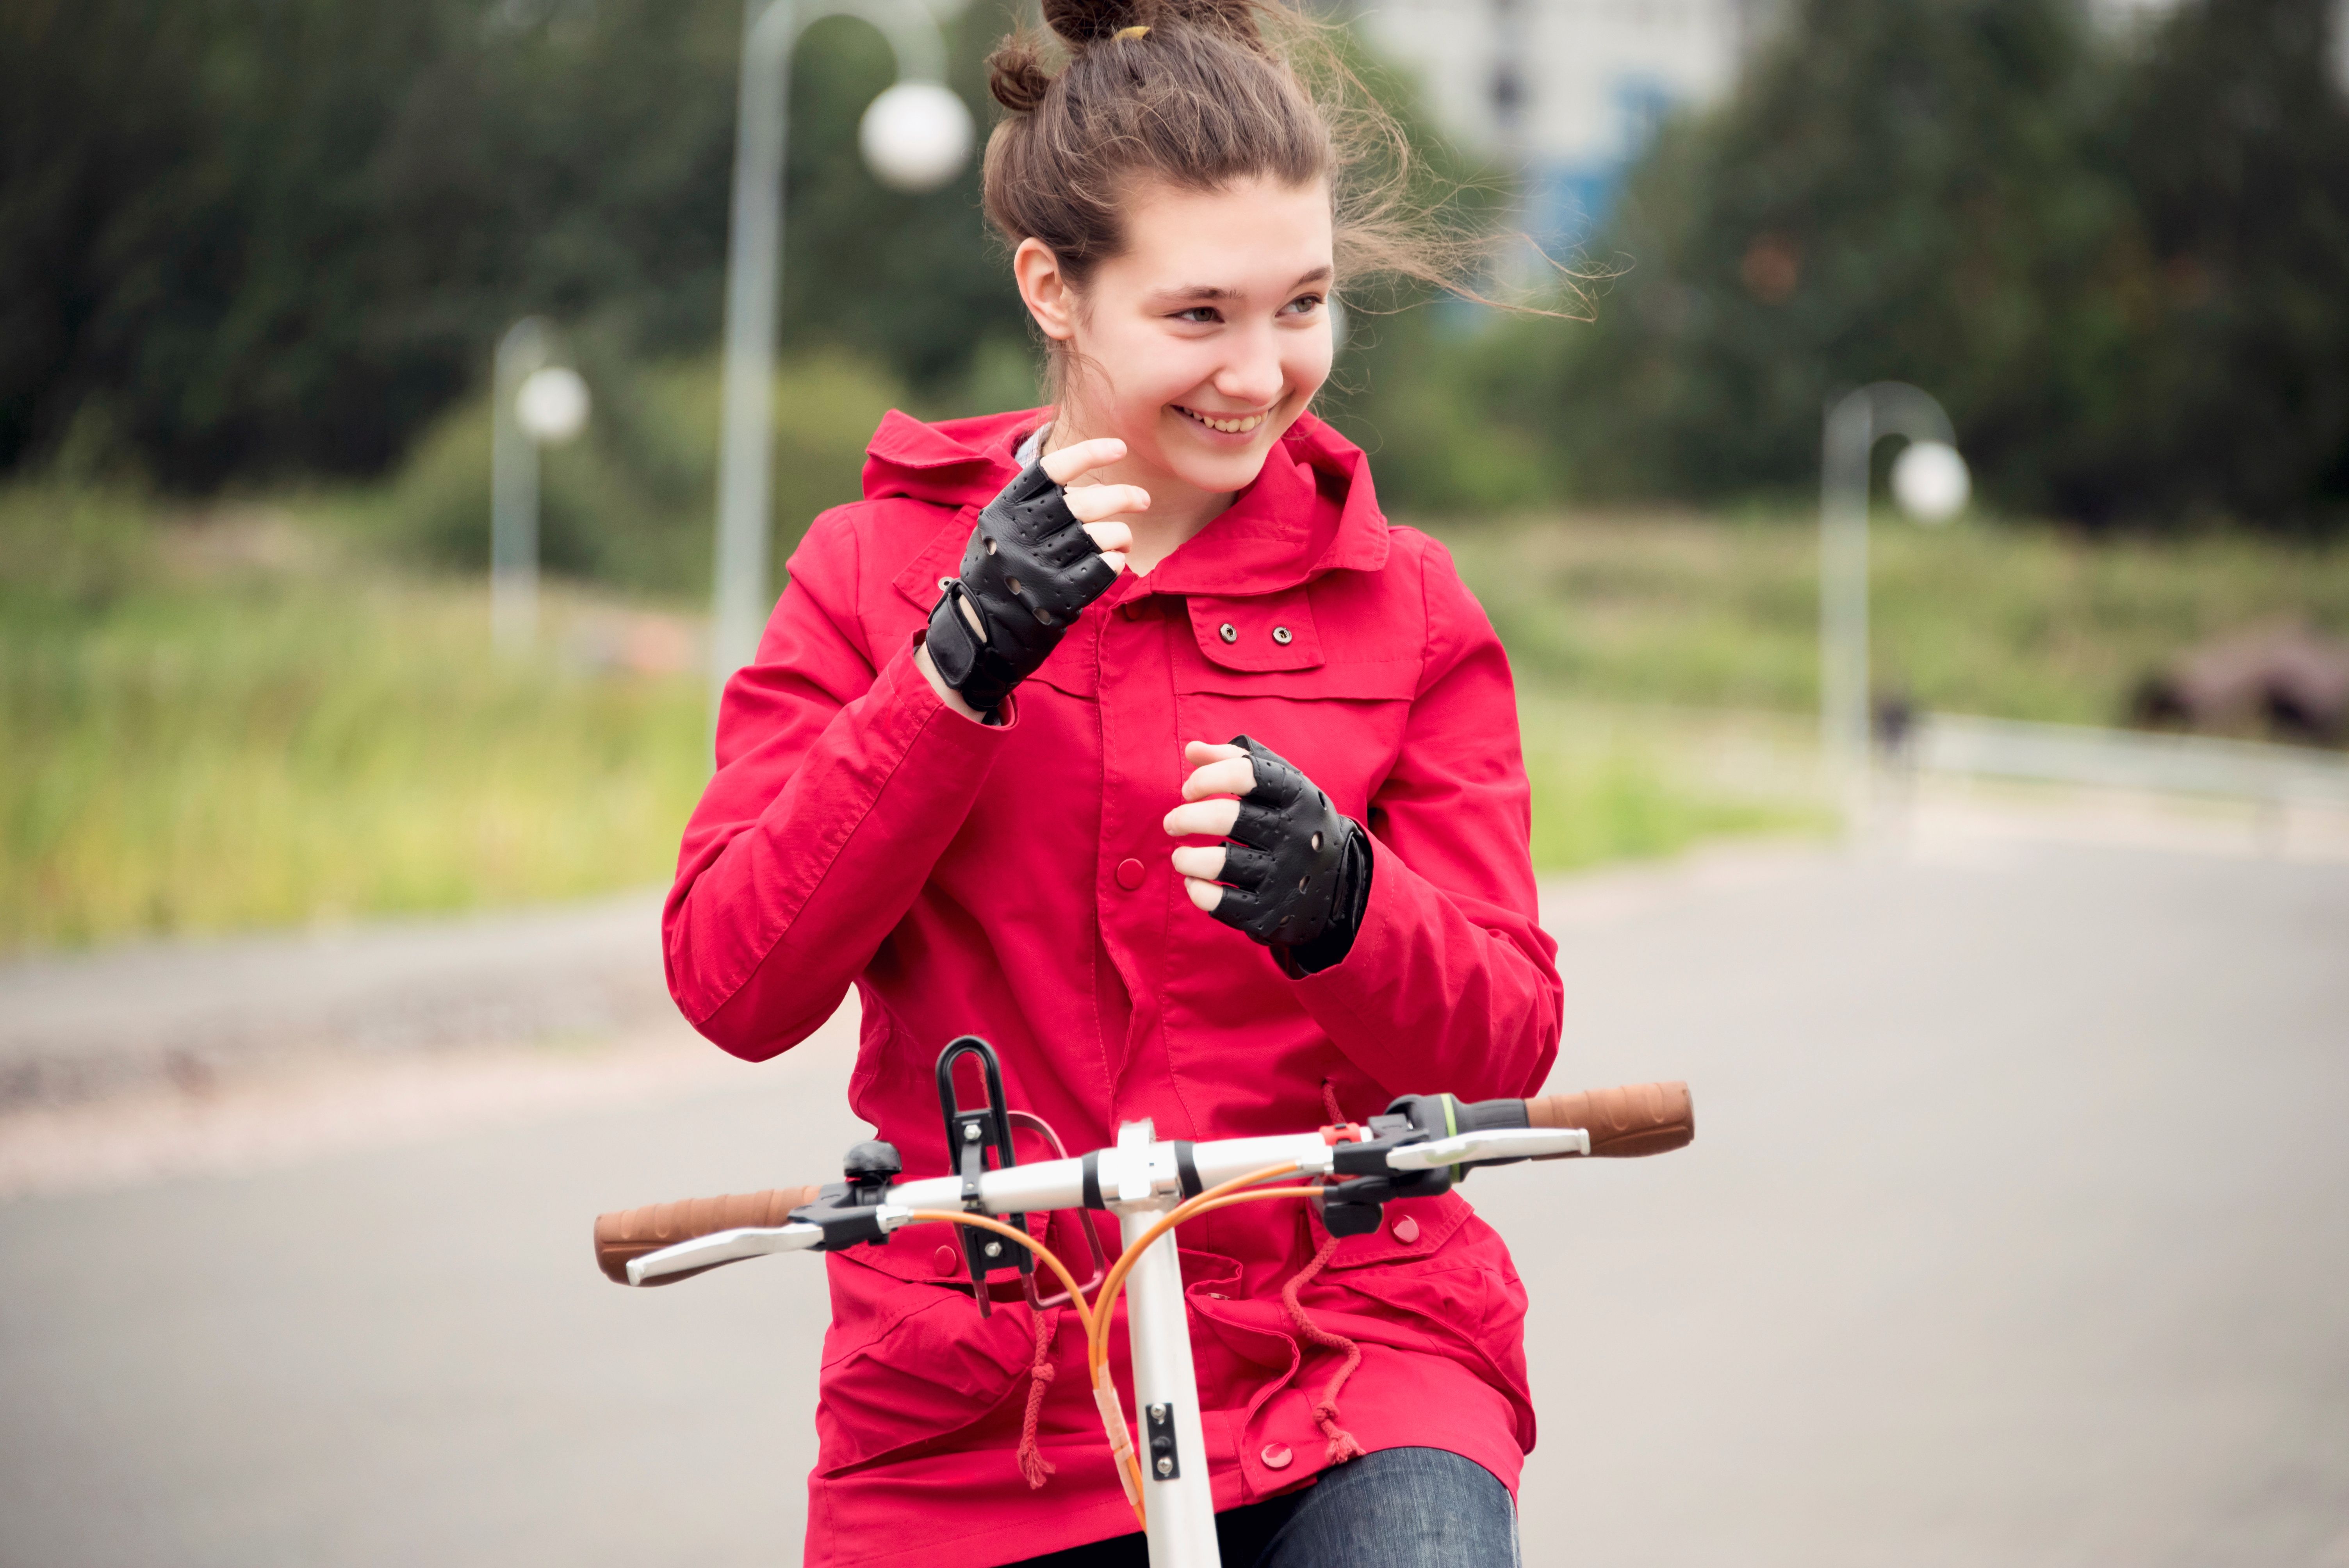 A smiling woman in a red shirt and gloves riding a bike with trees and lampposts in the background